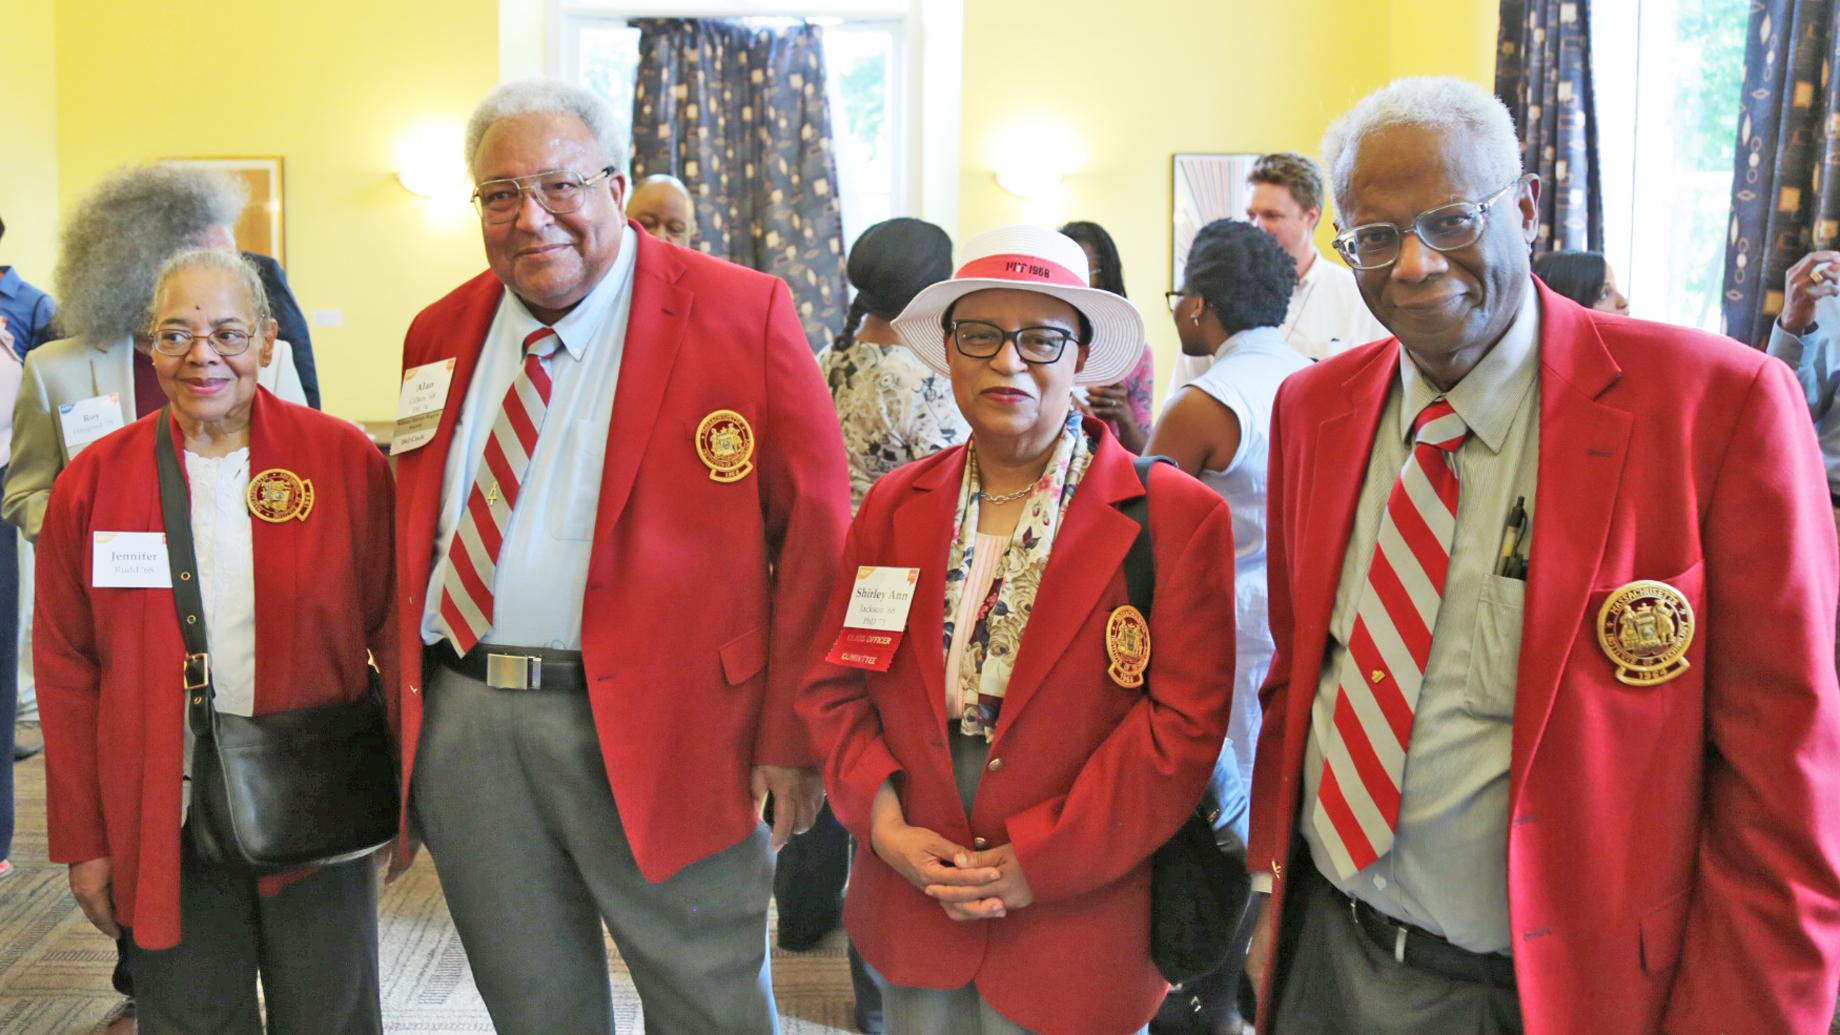 BAMIT Redcoats at the Black Graduate Reception, 2018